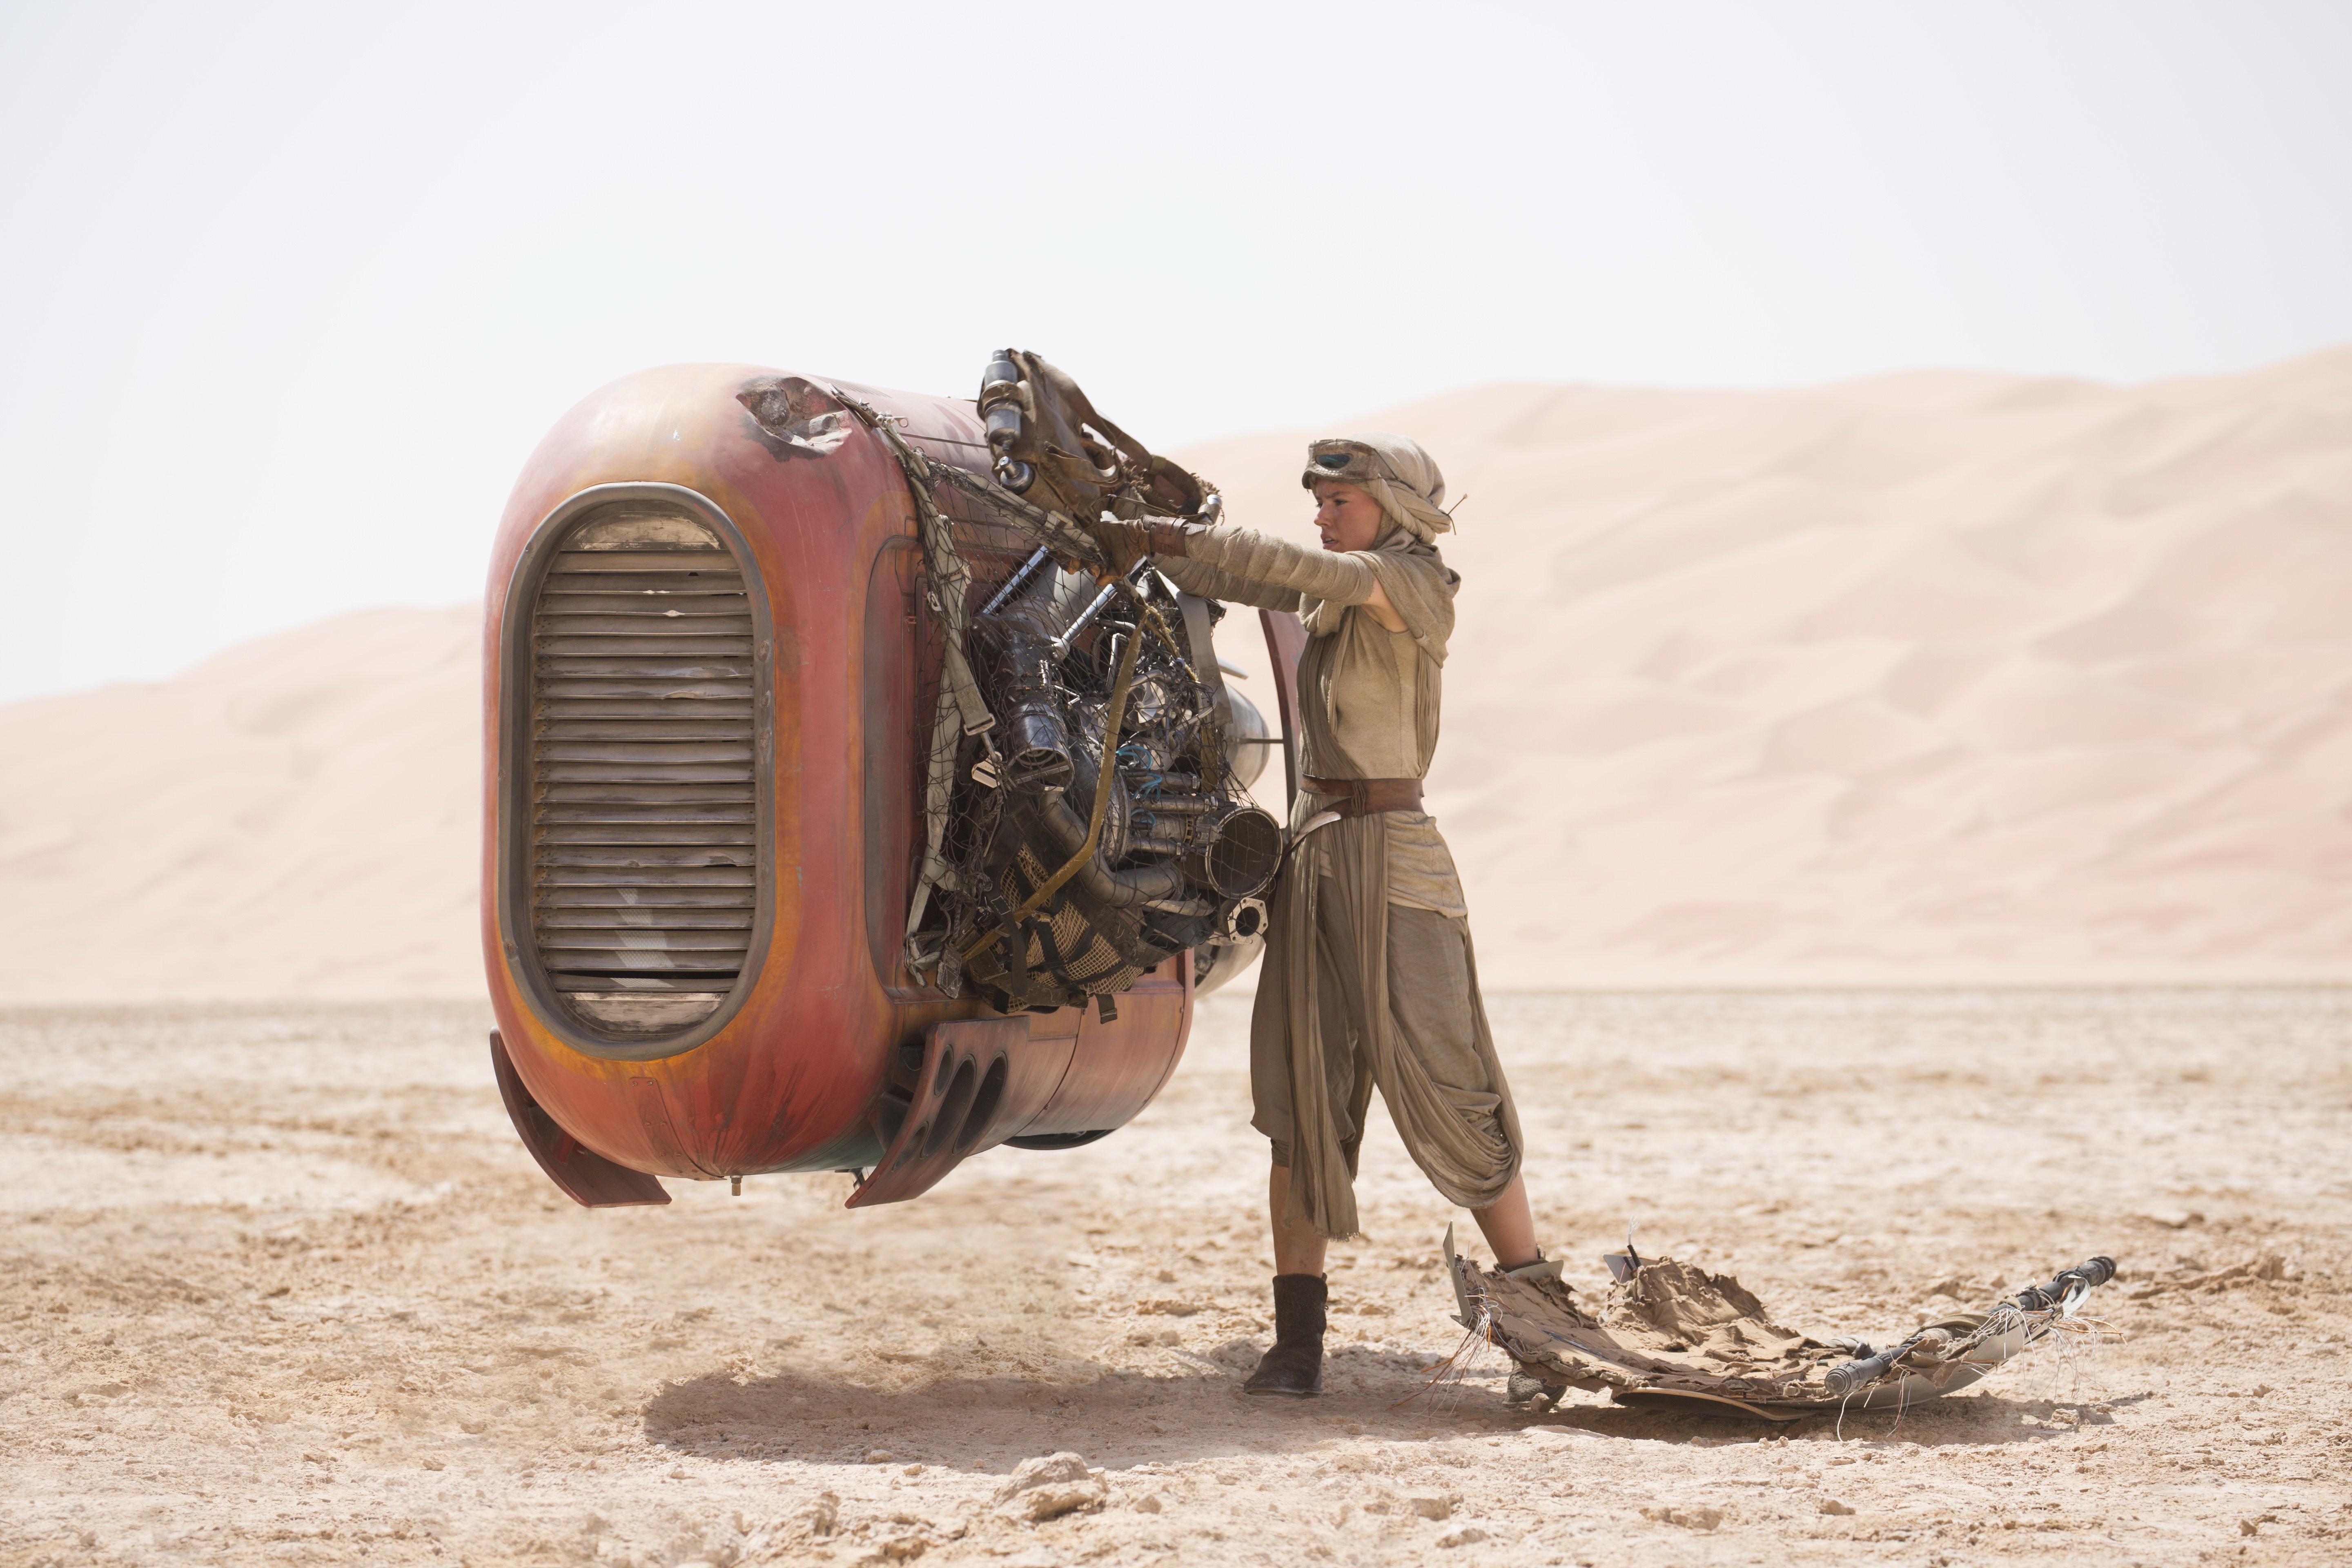 General 5760x3840 Star Wars Star Wars: The Force Awakens Daisy Ridley women actress movies science fiction vehicle Star Wars Heroes science fiction women